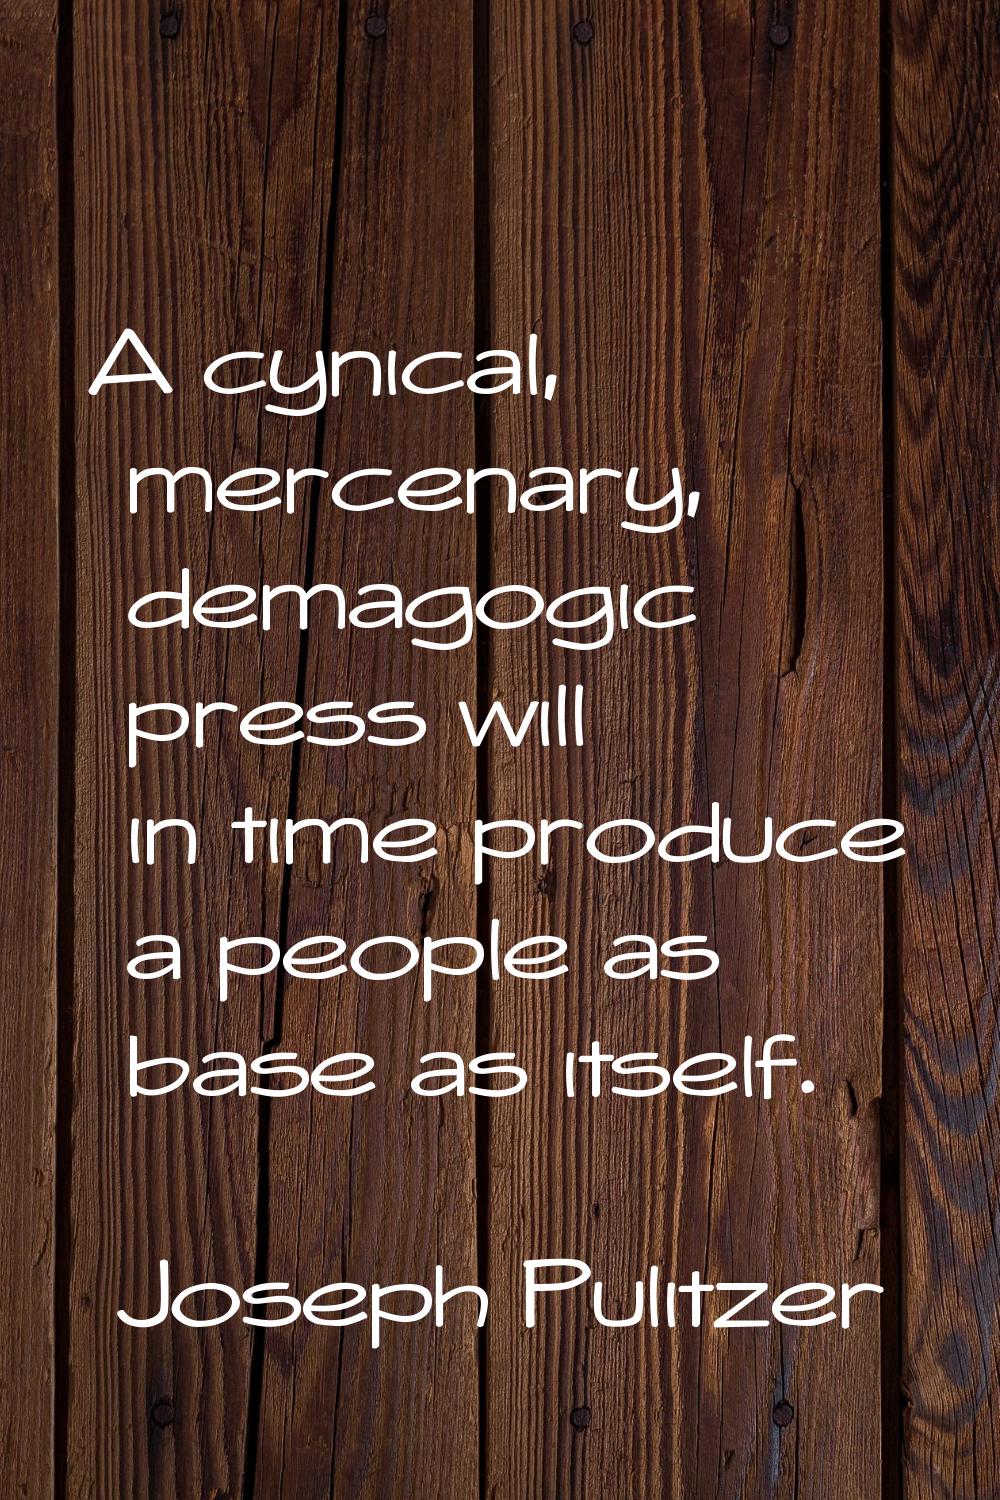 A cynical, mercenary, demagogic press will in time produce a people as base as itself.